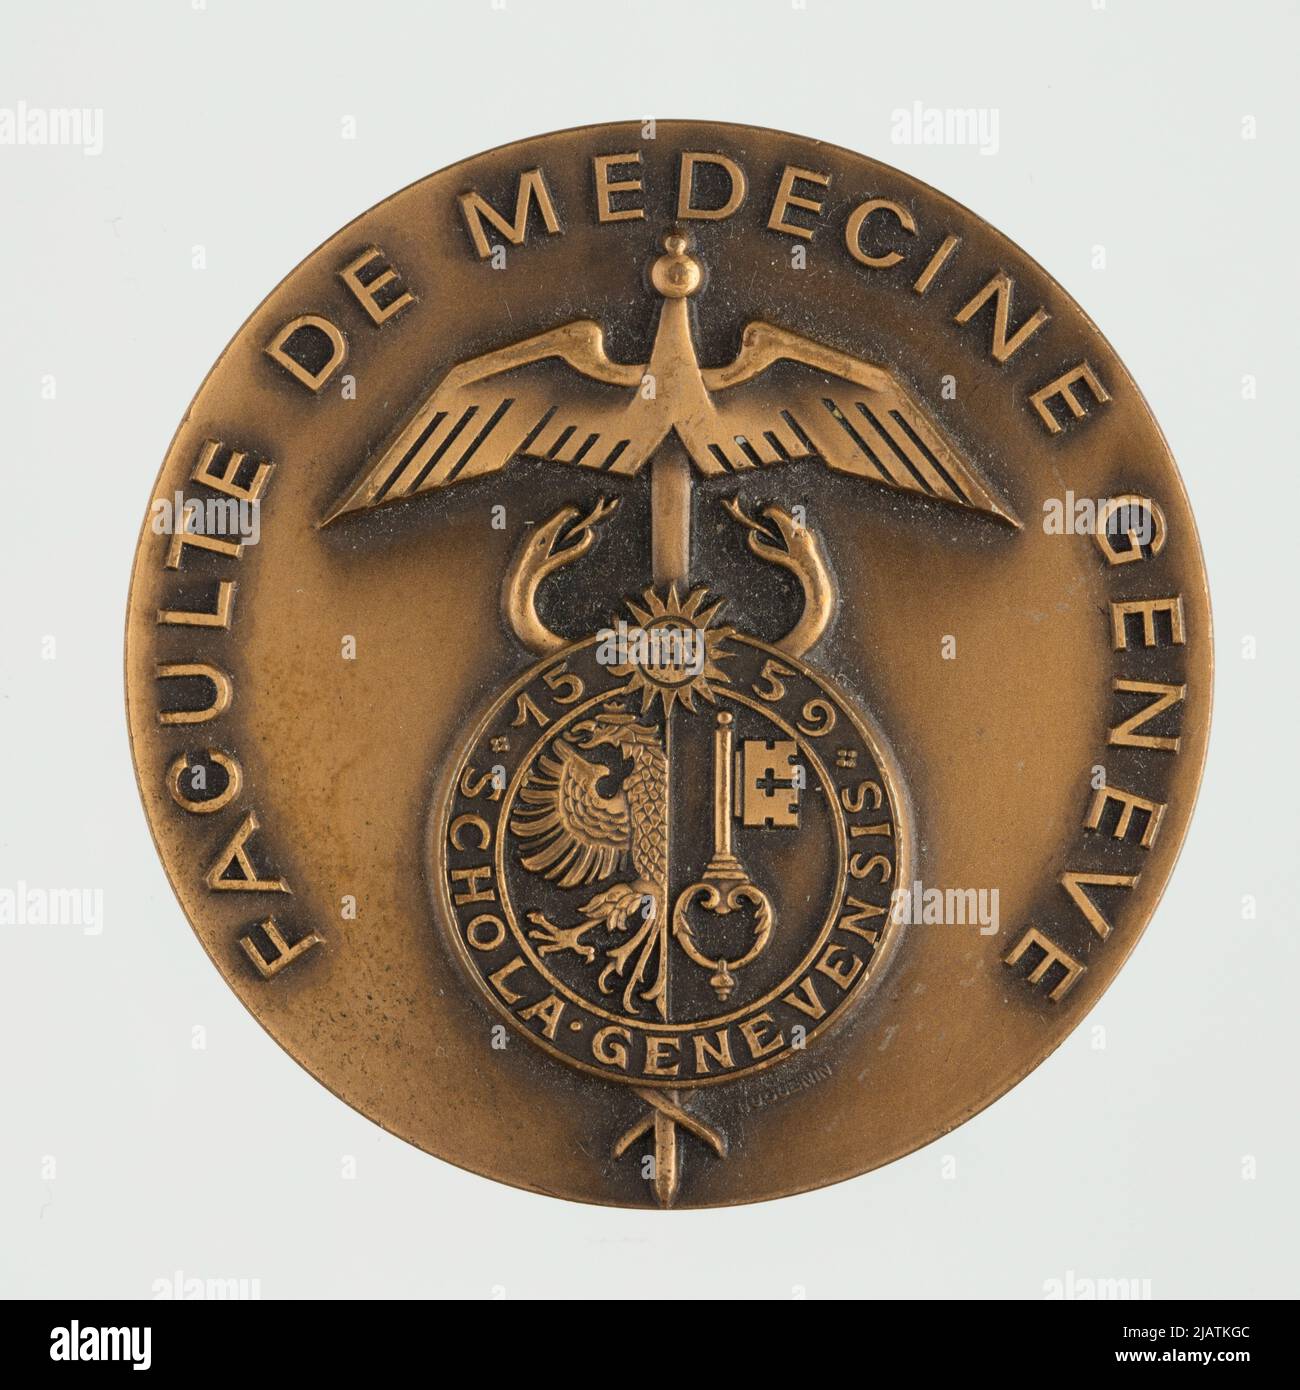 A medal commemorating the 100th anniversary of the Faculty of Medicine at the University of Geneva Huguenin Stock Photo